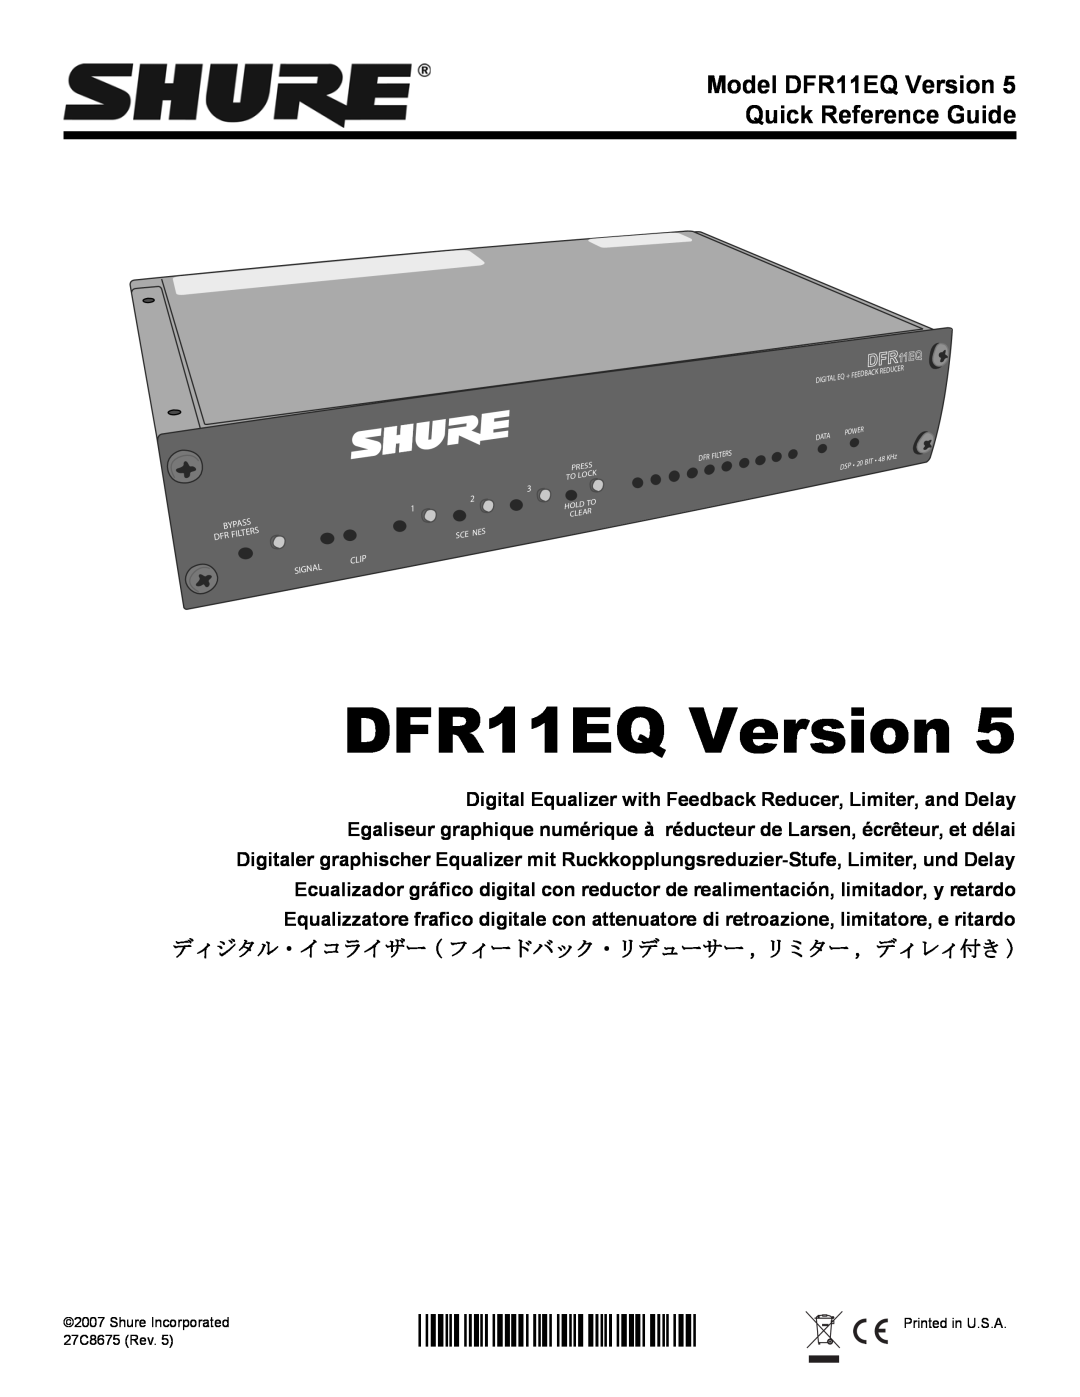 Shure DFR11EQ VERSION 5 manual 27C8675, Model DFR11EQ Version 5 Quick Reference Guide 